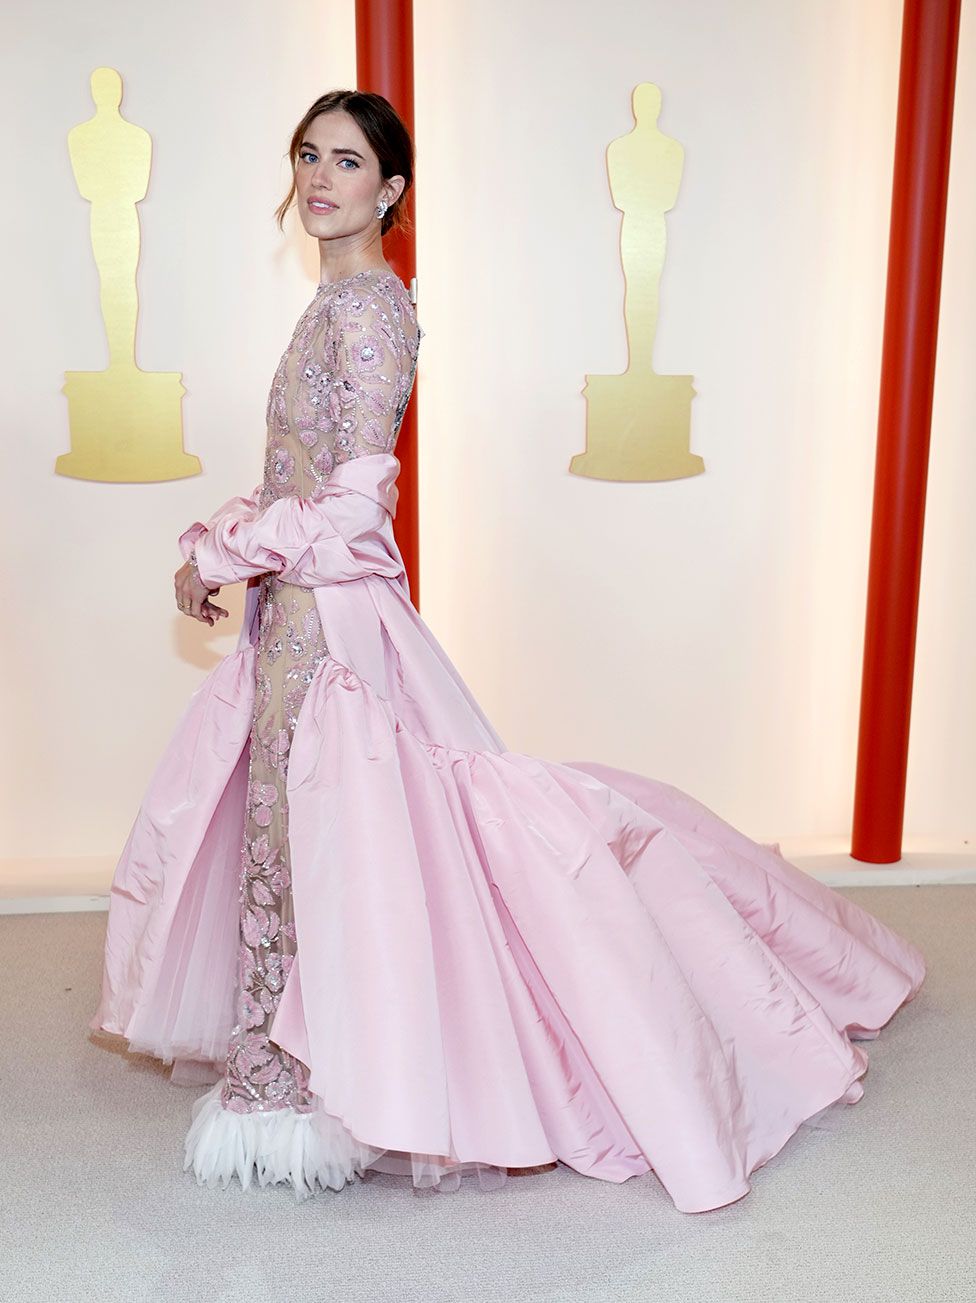 Allison Williams attends the 95th Annual Academy Awards on March 12, 2023 in Hollywood, California